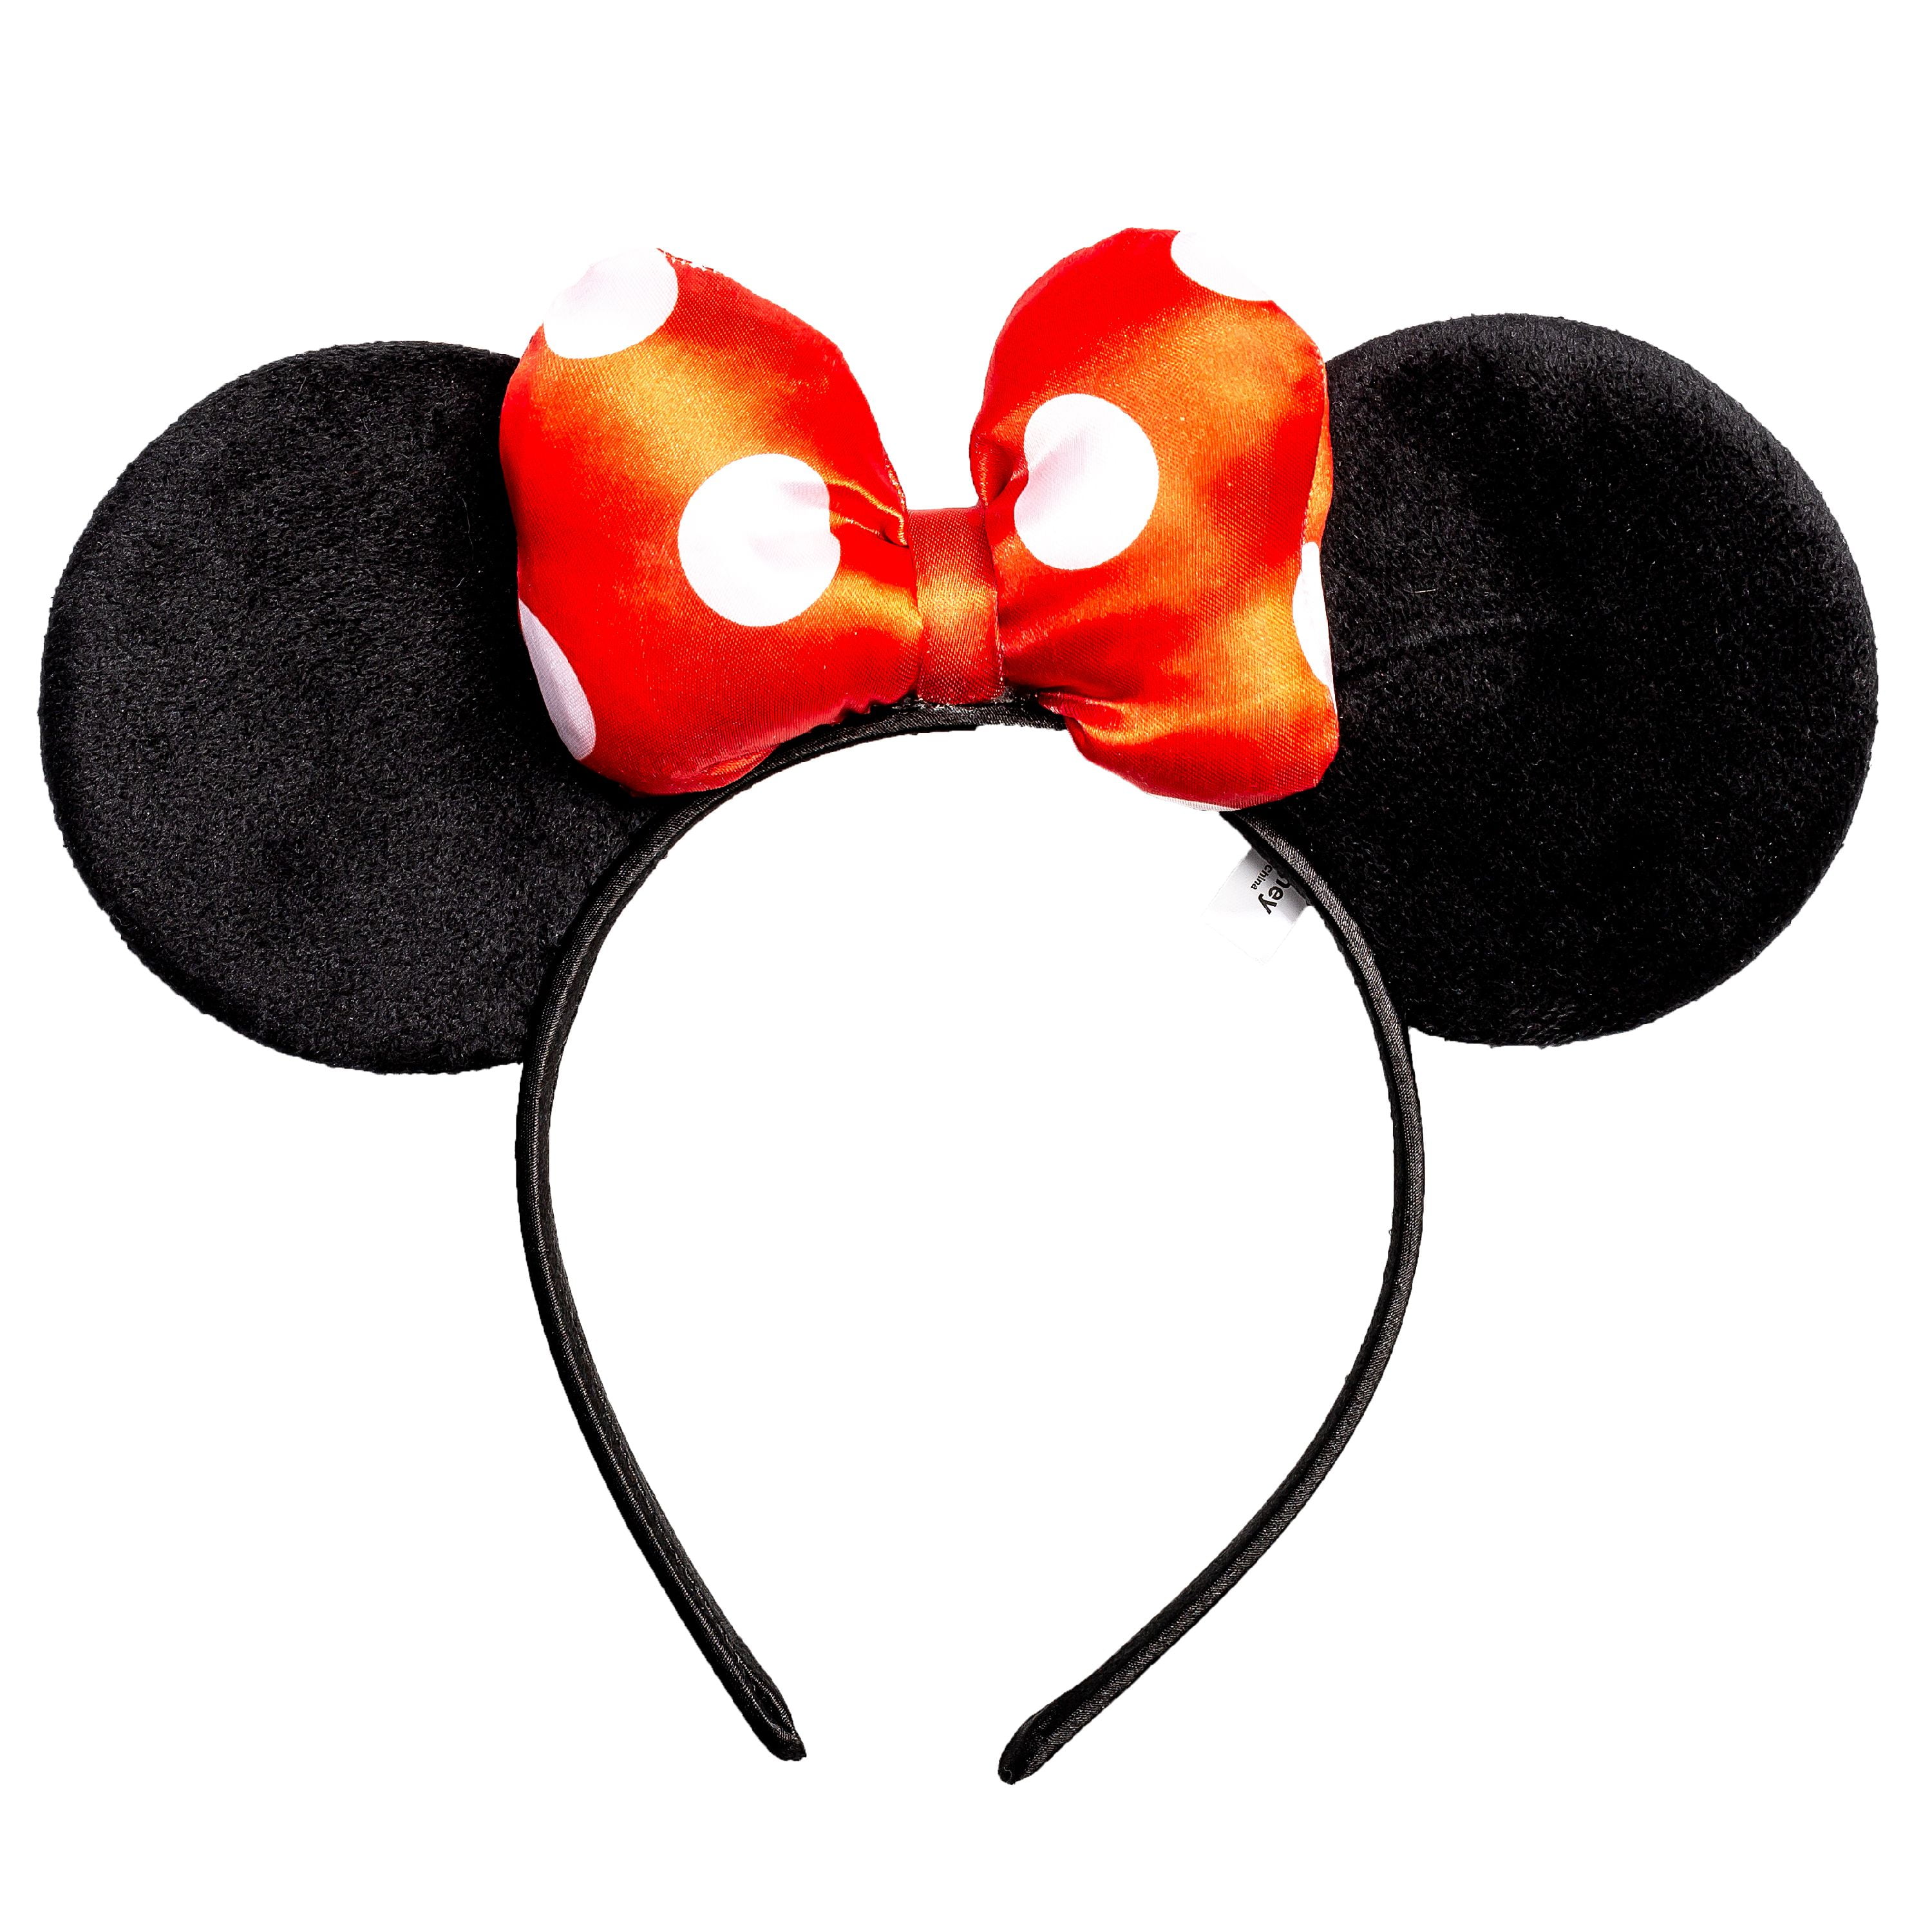 Disney Girls Hairband Minnie Mouse Ears With Red Bow Black Headband Xmas Gift 